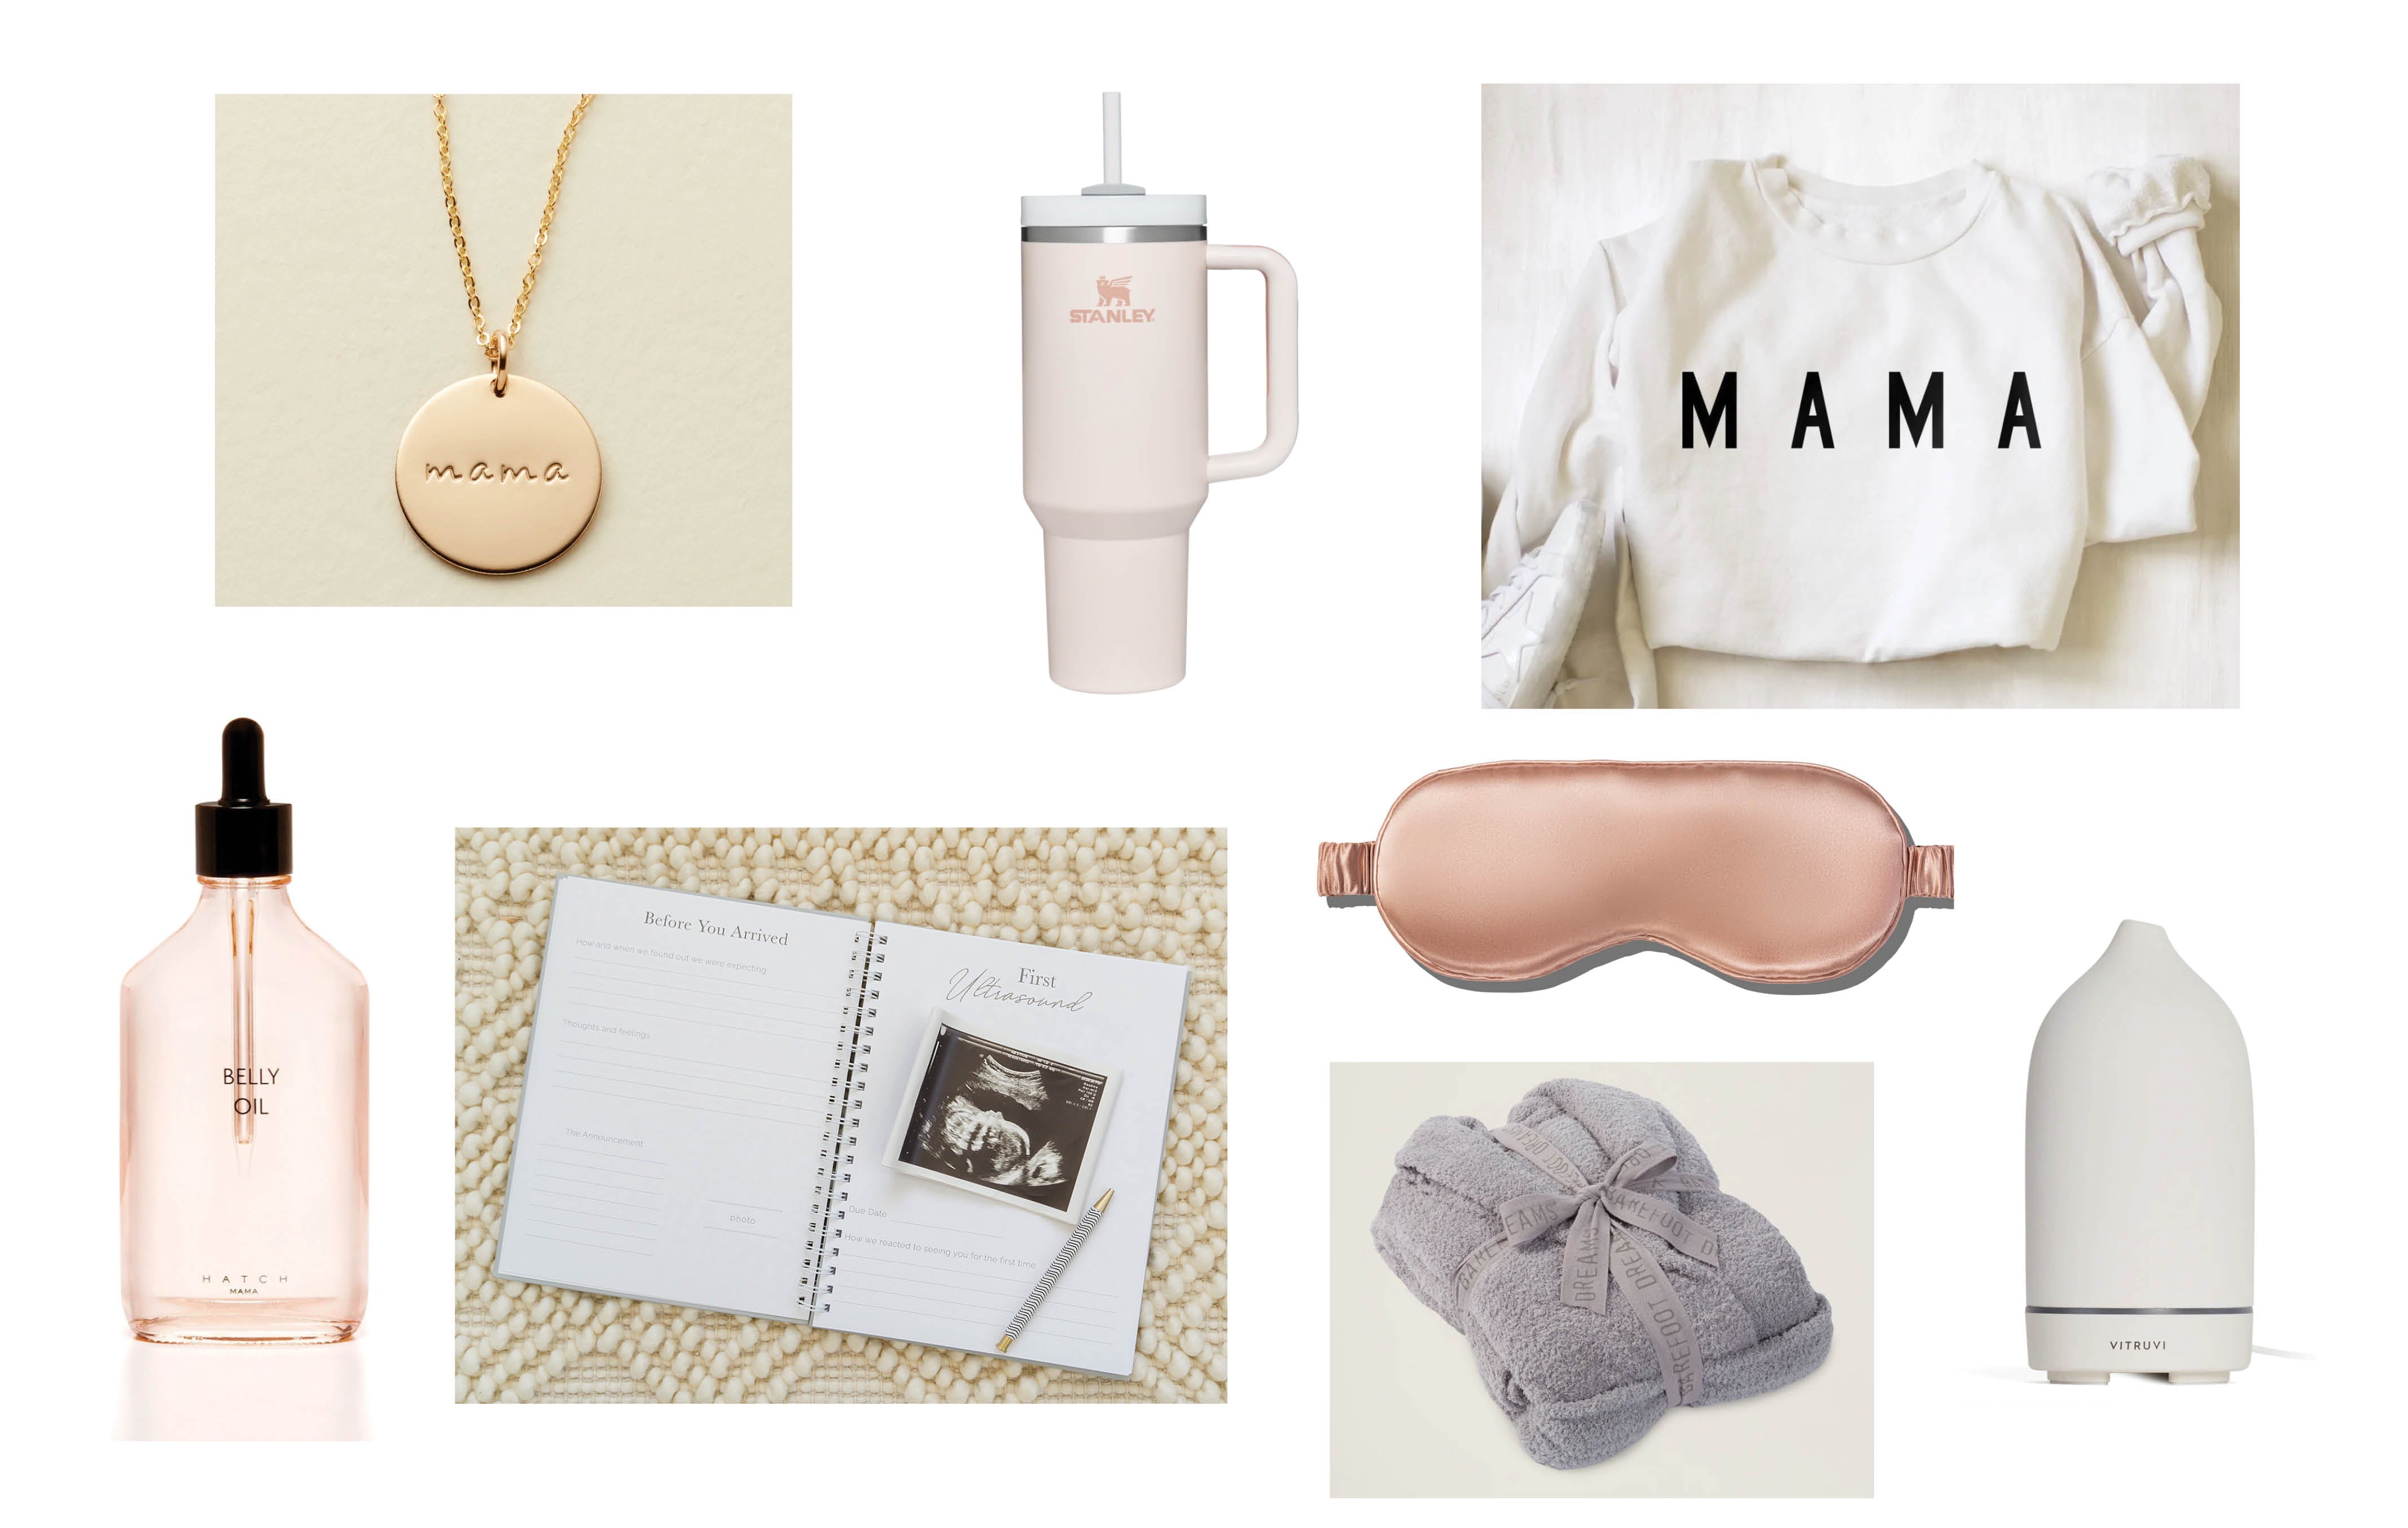 Best Gifts for Expecting Moms